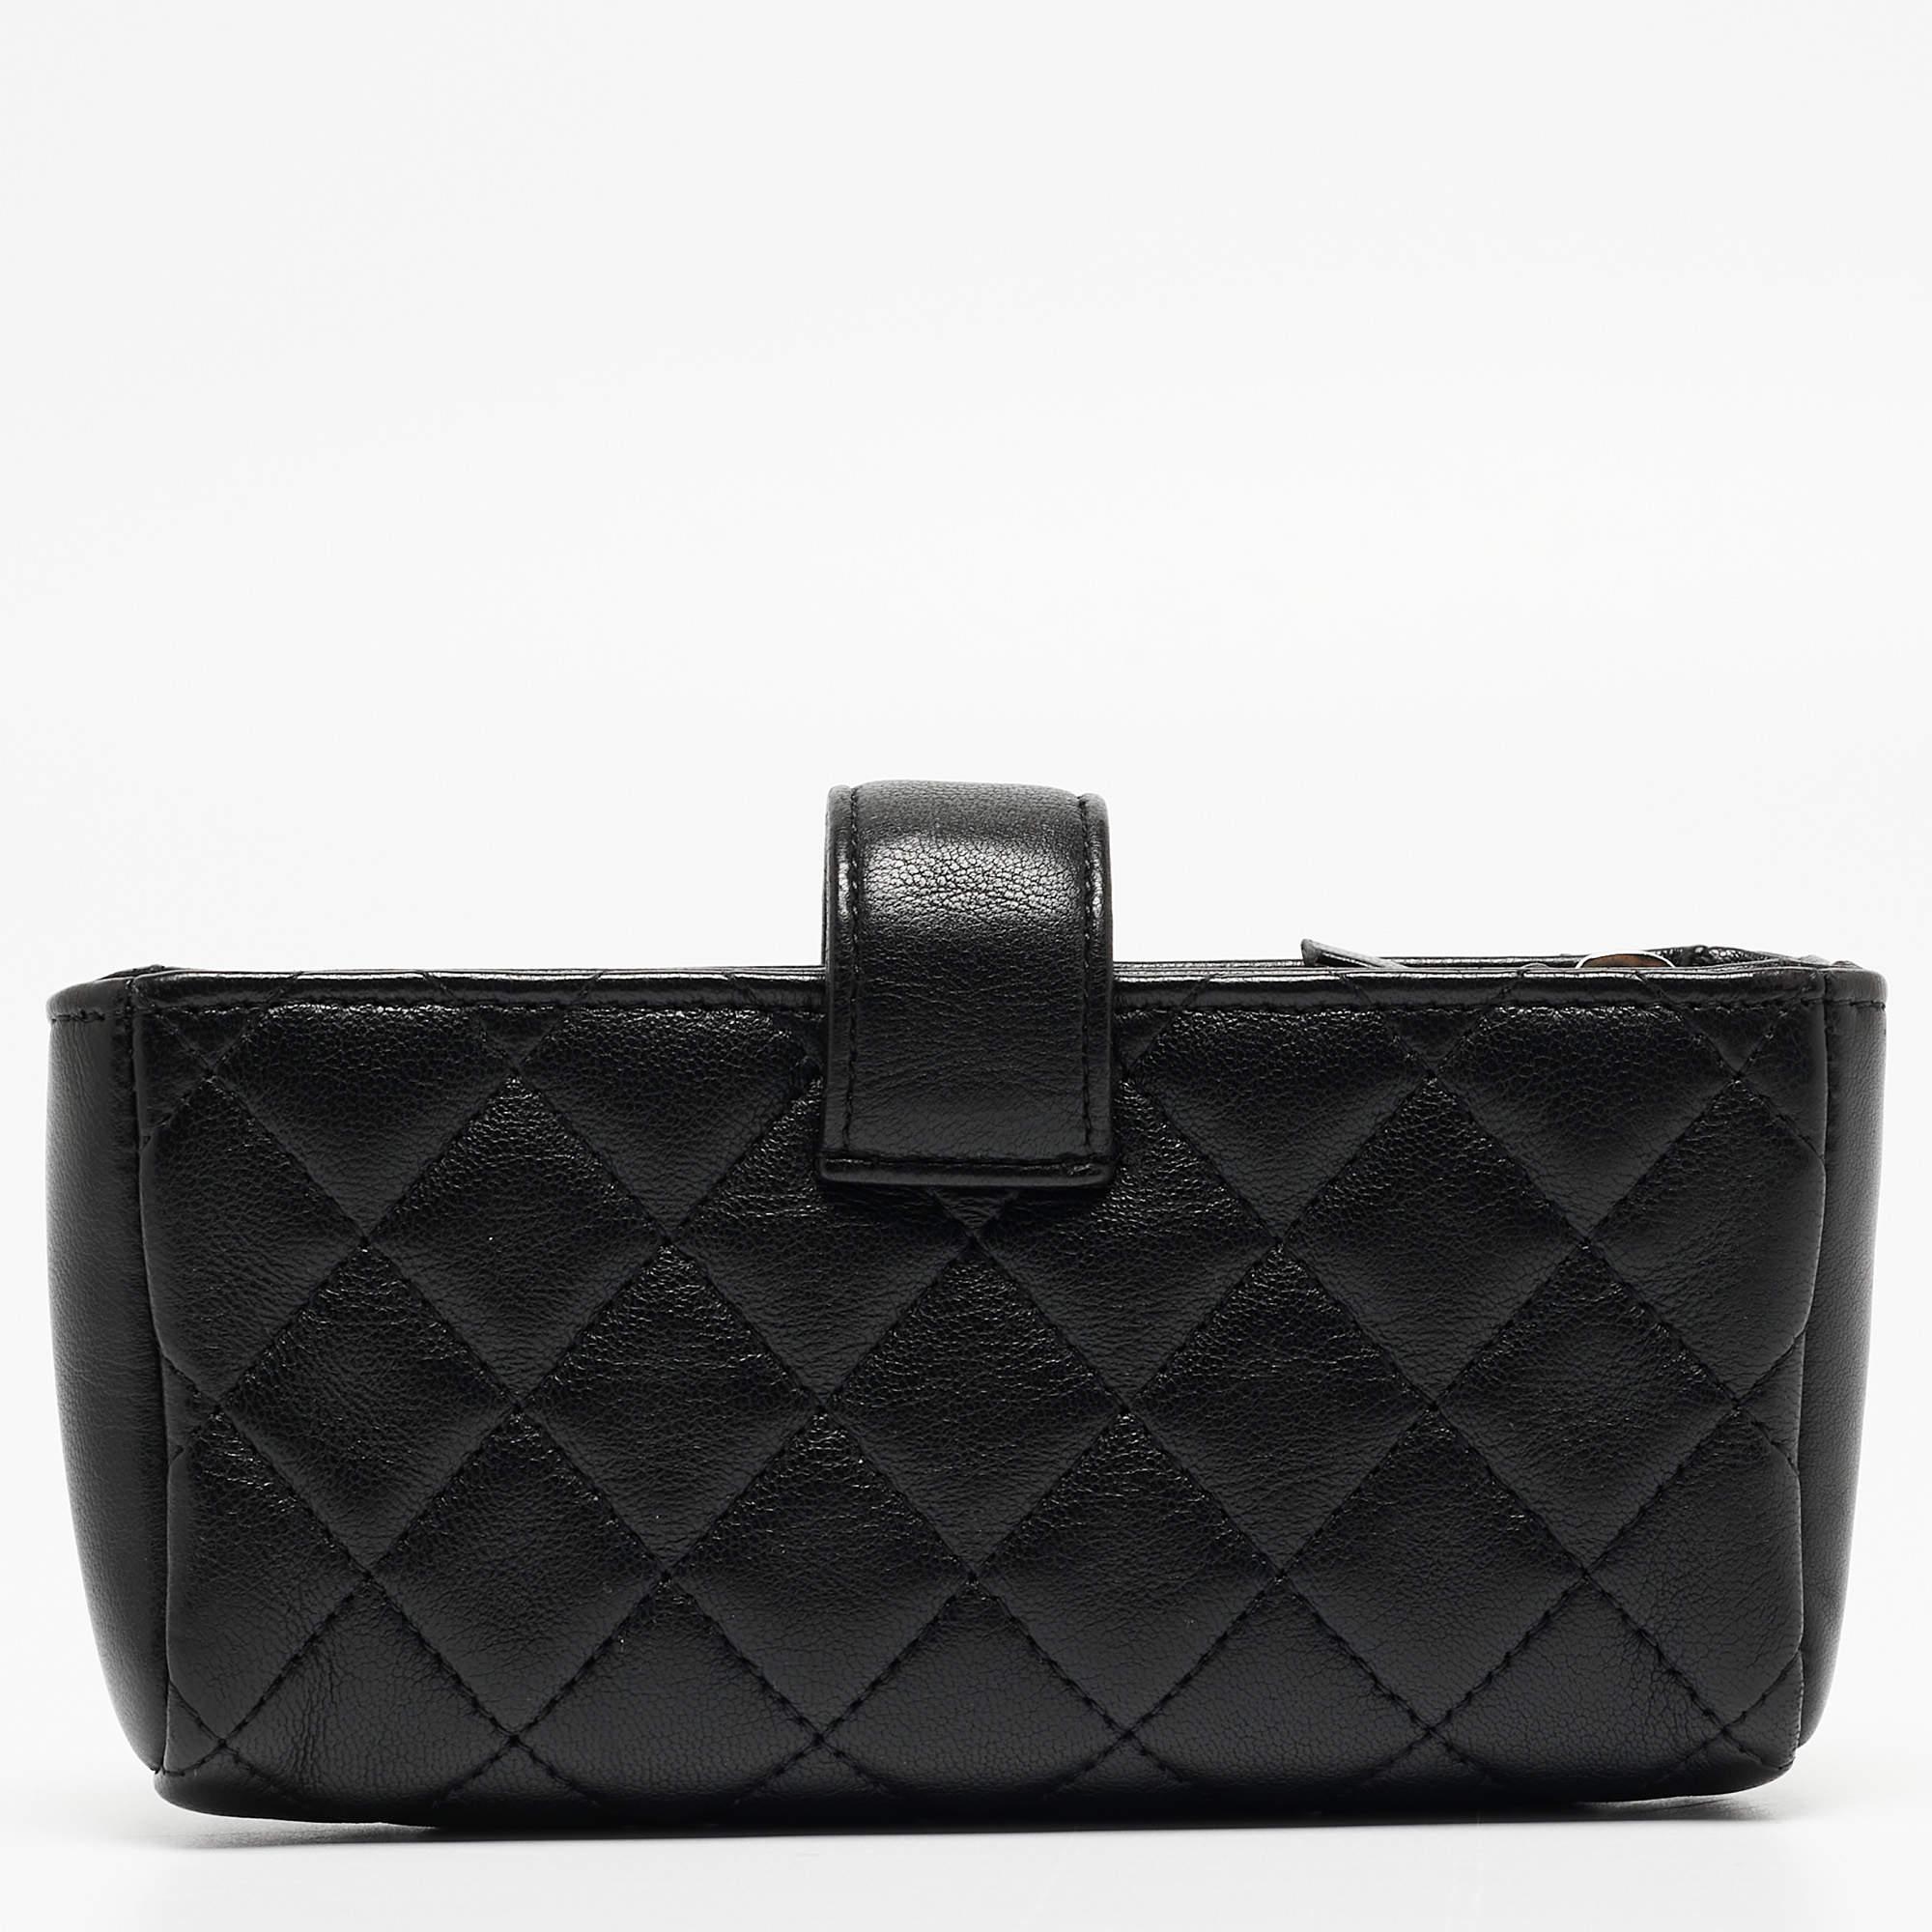 Why just stop at owning a Chanel bag when you can also carry your phone in a lovely leather pouch with the brand's signature quilt! This creation from Chanel is truly one tech accessory you will love to flaunt. It has a CC-adorned flap that reveals